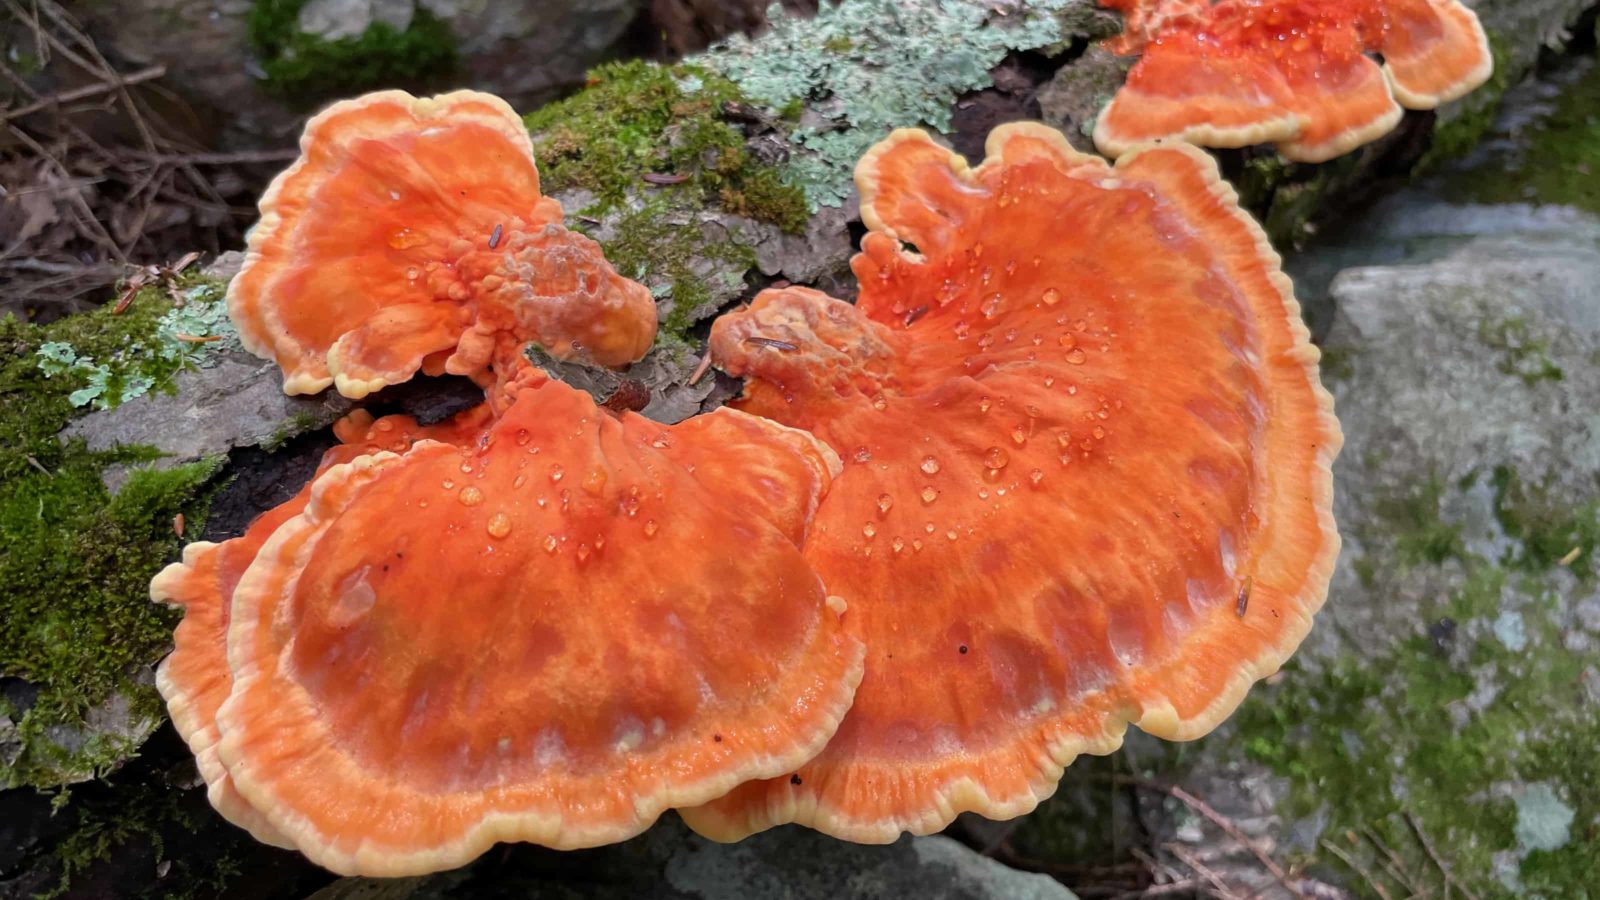 Chicken of the woods shows deep orange on a weathered log along Broad Brook.